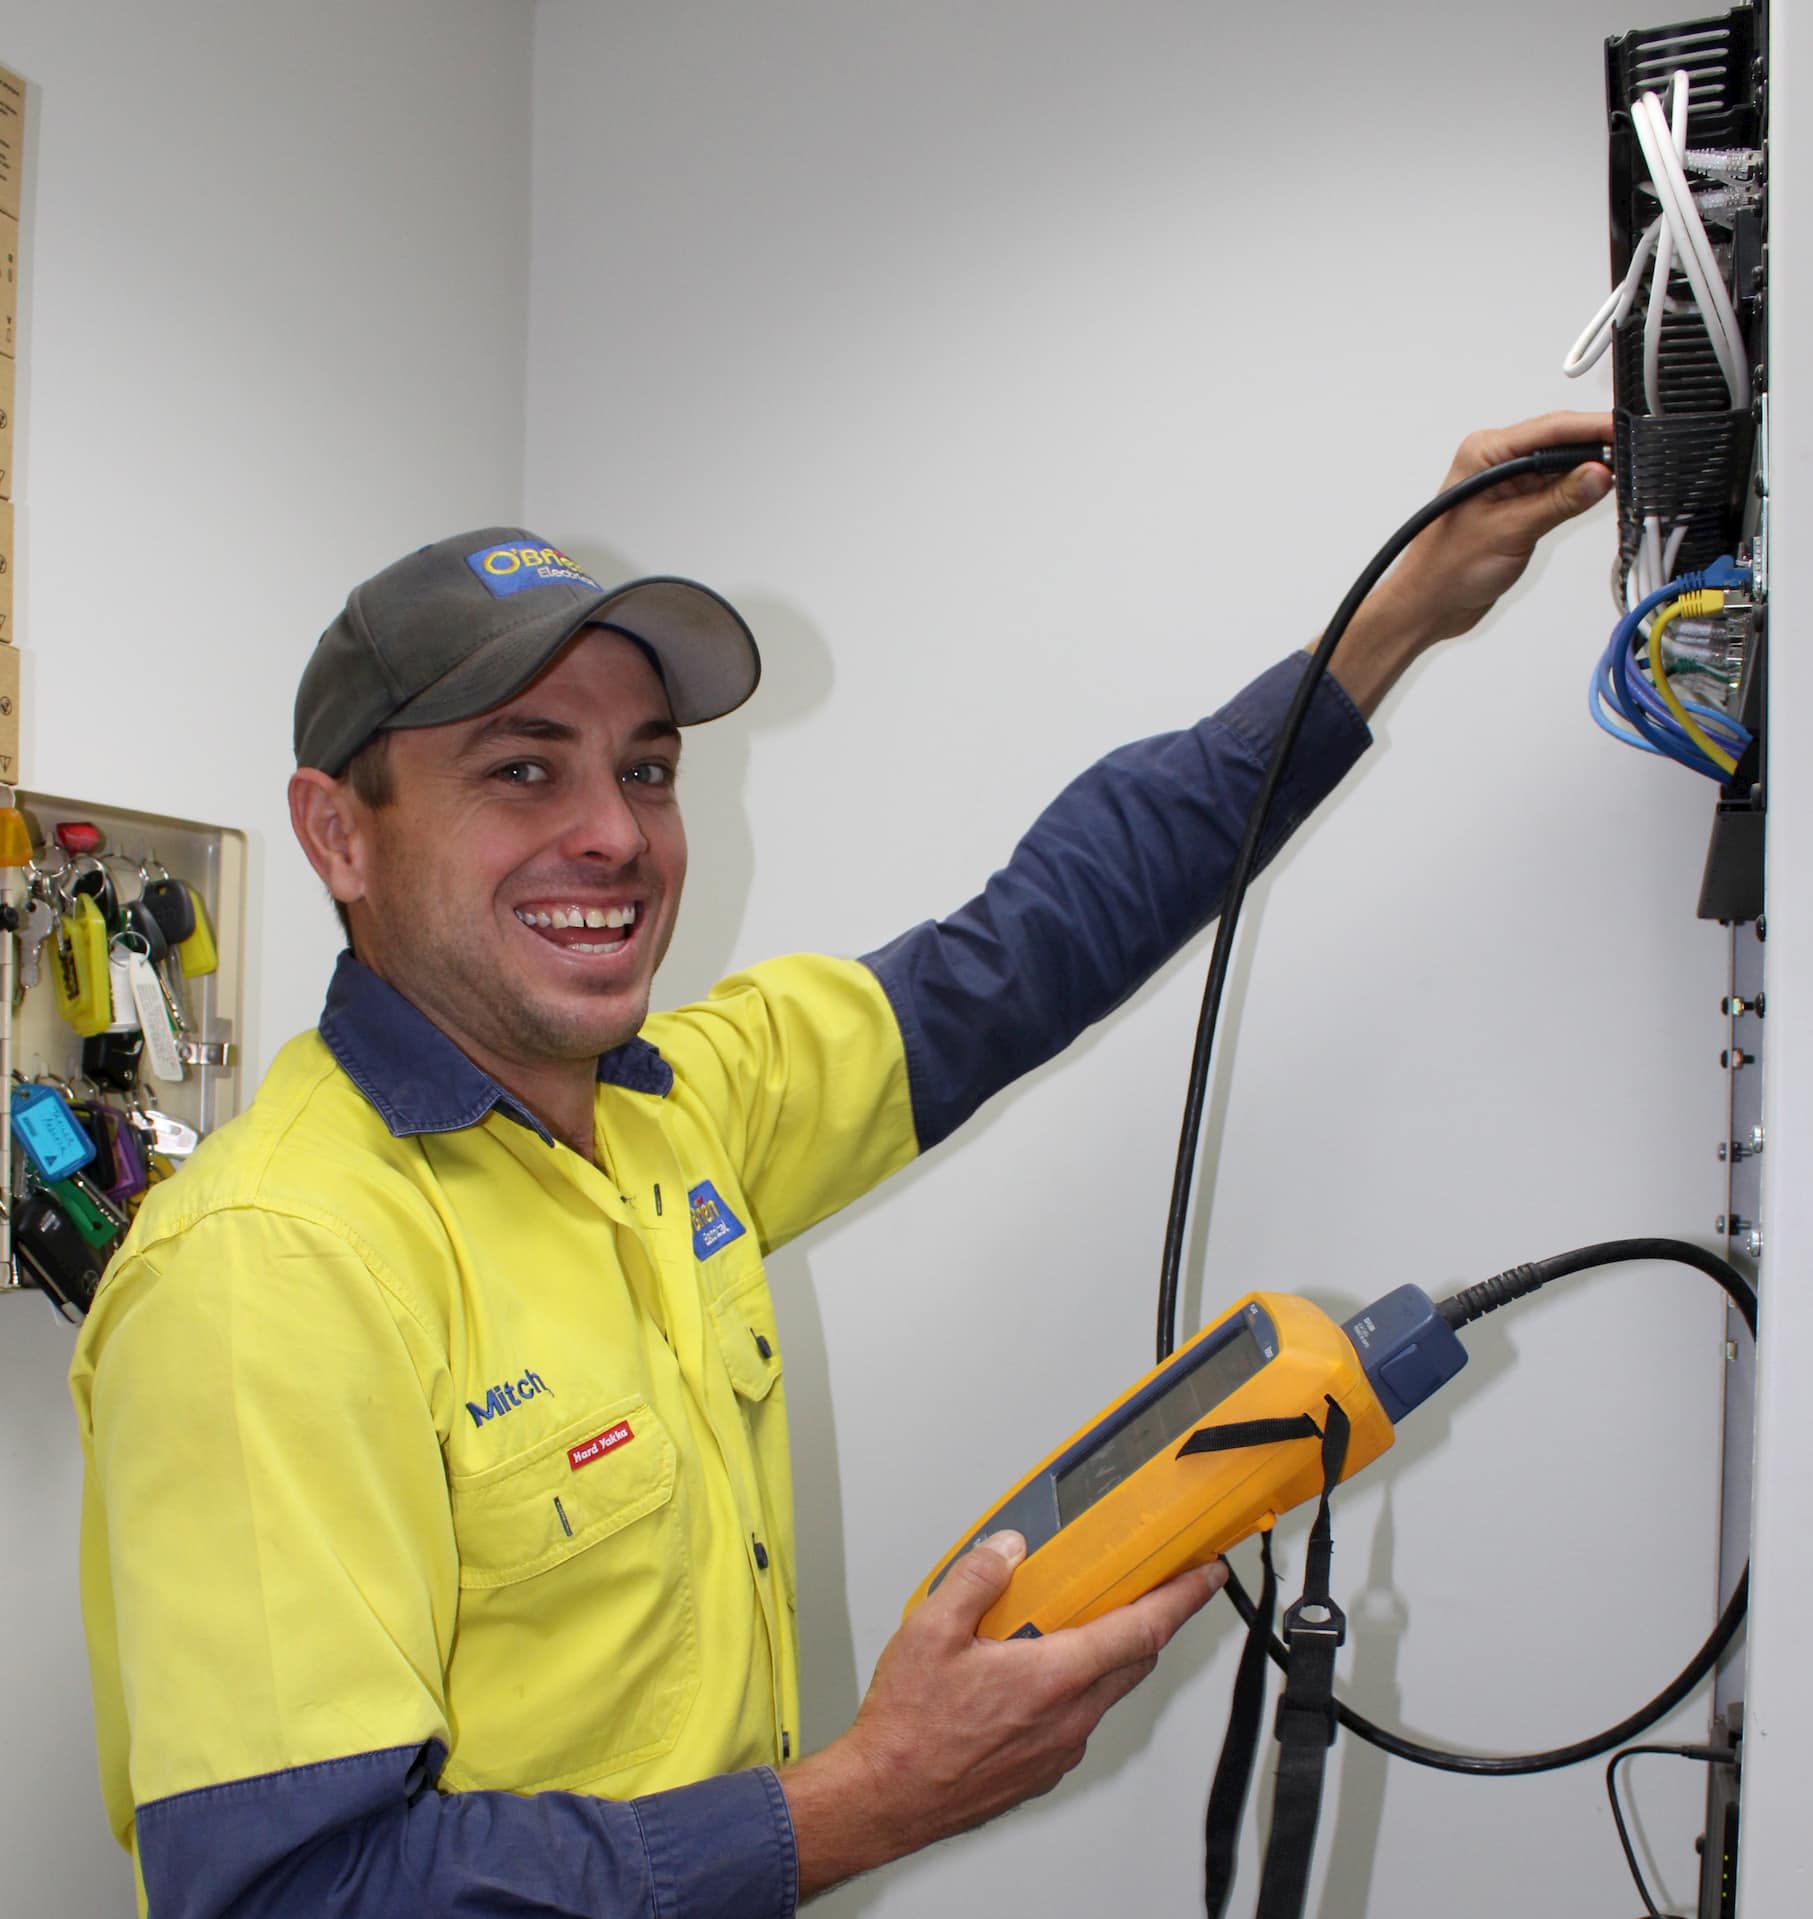 What Should I Look For When Hiring An Electrician?